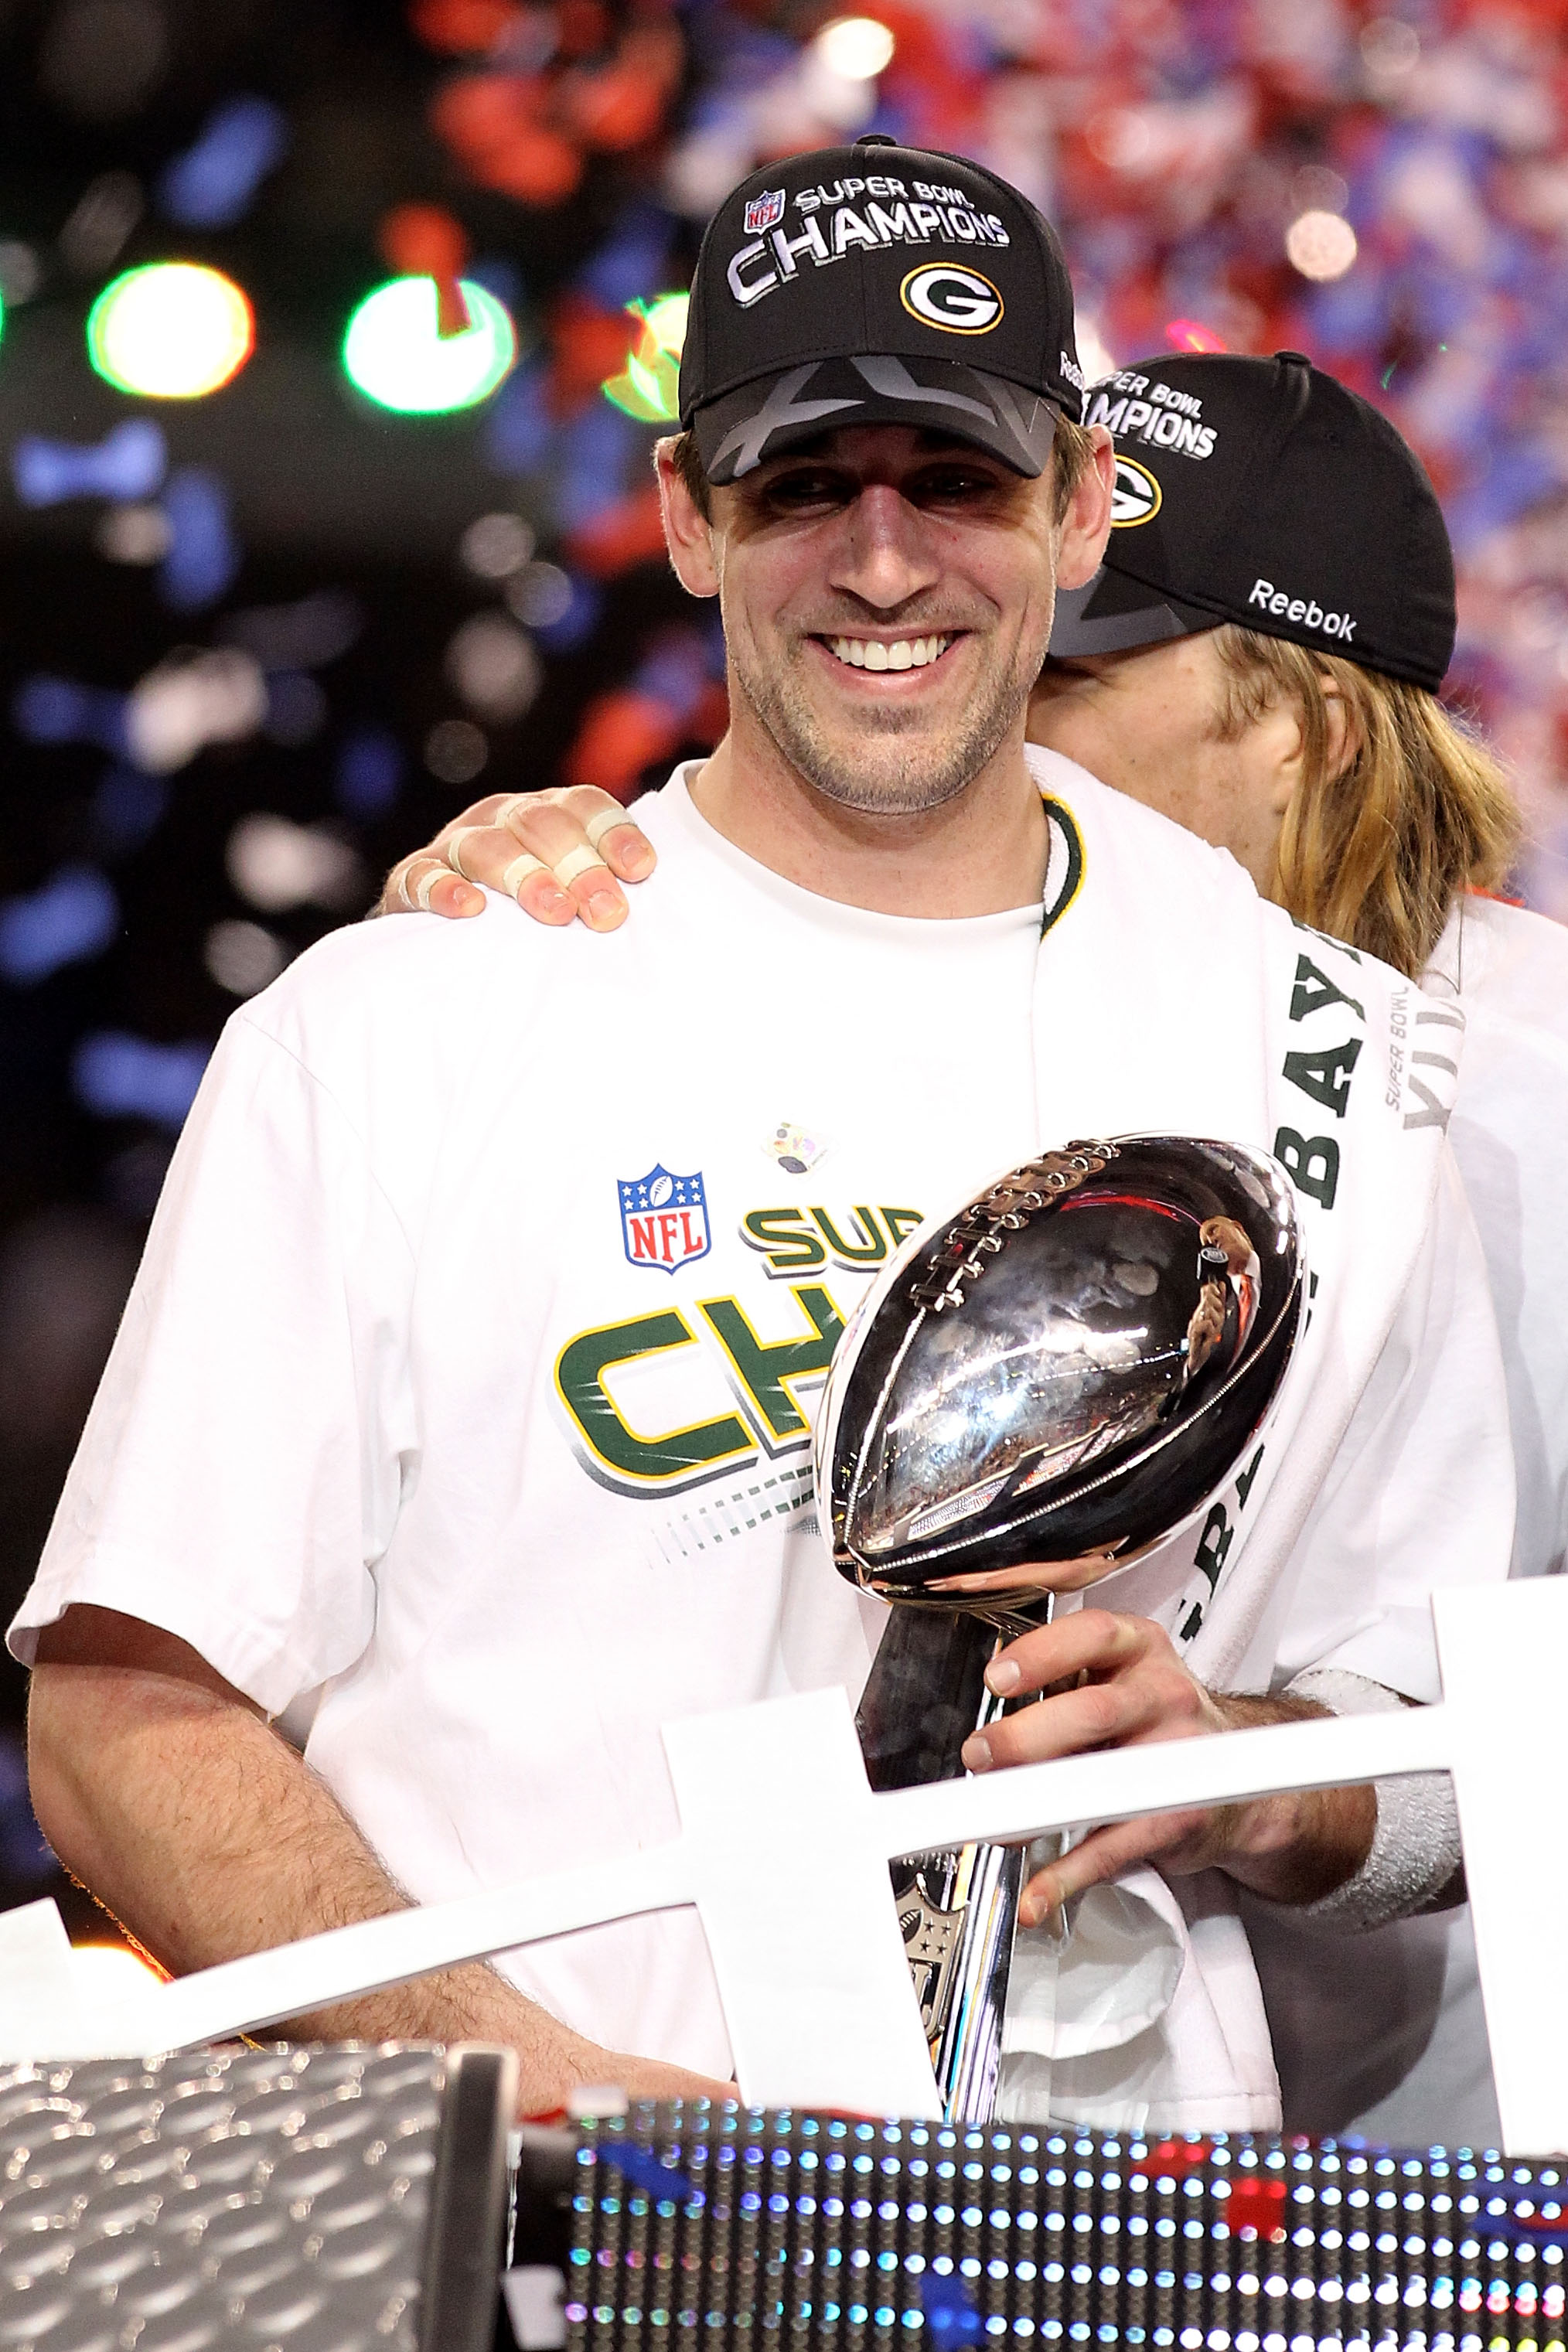 ARLINGTON, TX - FEBRUARY 06:  MVP Aaron Rodgers #12 of the Green Bay Packers celebrates with the Lombardi Trophy after winning Super Bowl XLV against the Pittsburgh Steelers at Cowboys Stadium on February 6, 2011 in Arlington, Texas.  (Photo by Al Bello/G